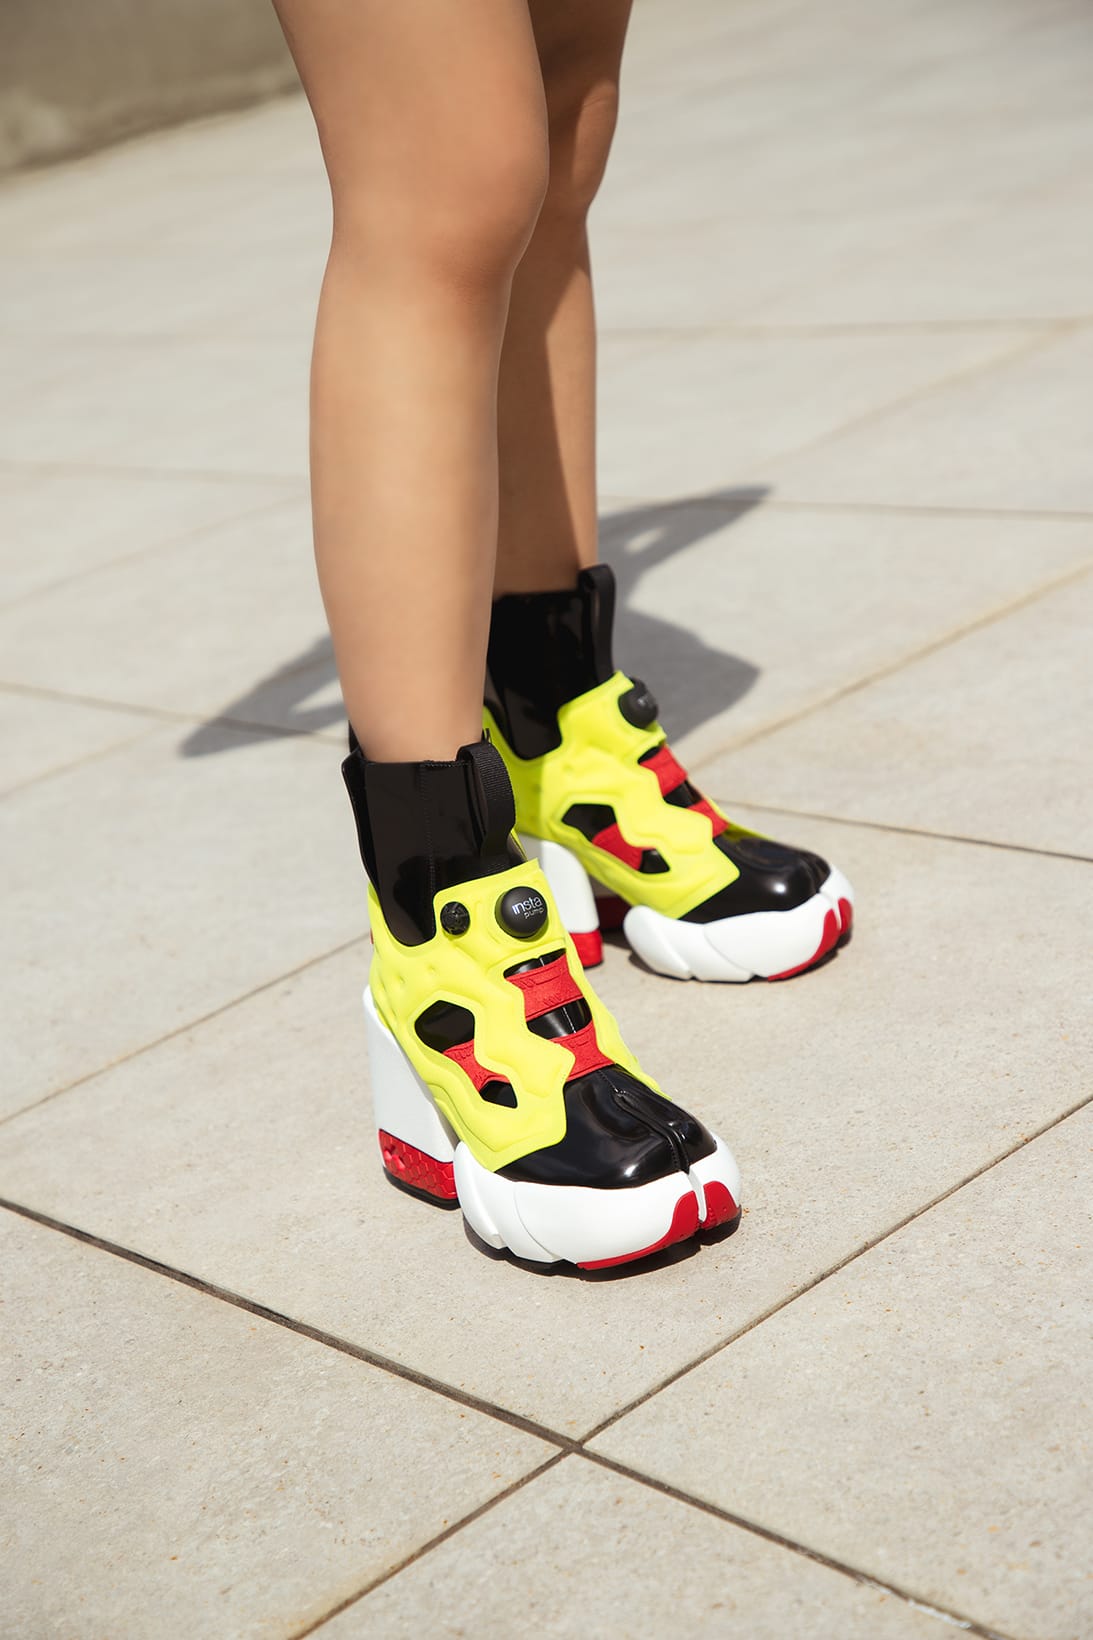 reebok ankle boots